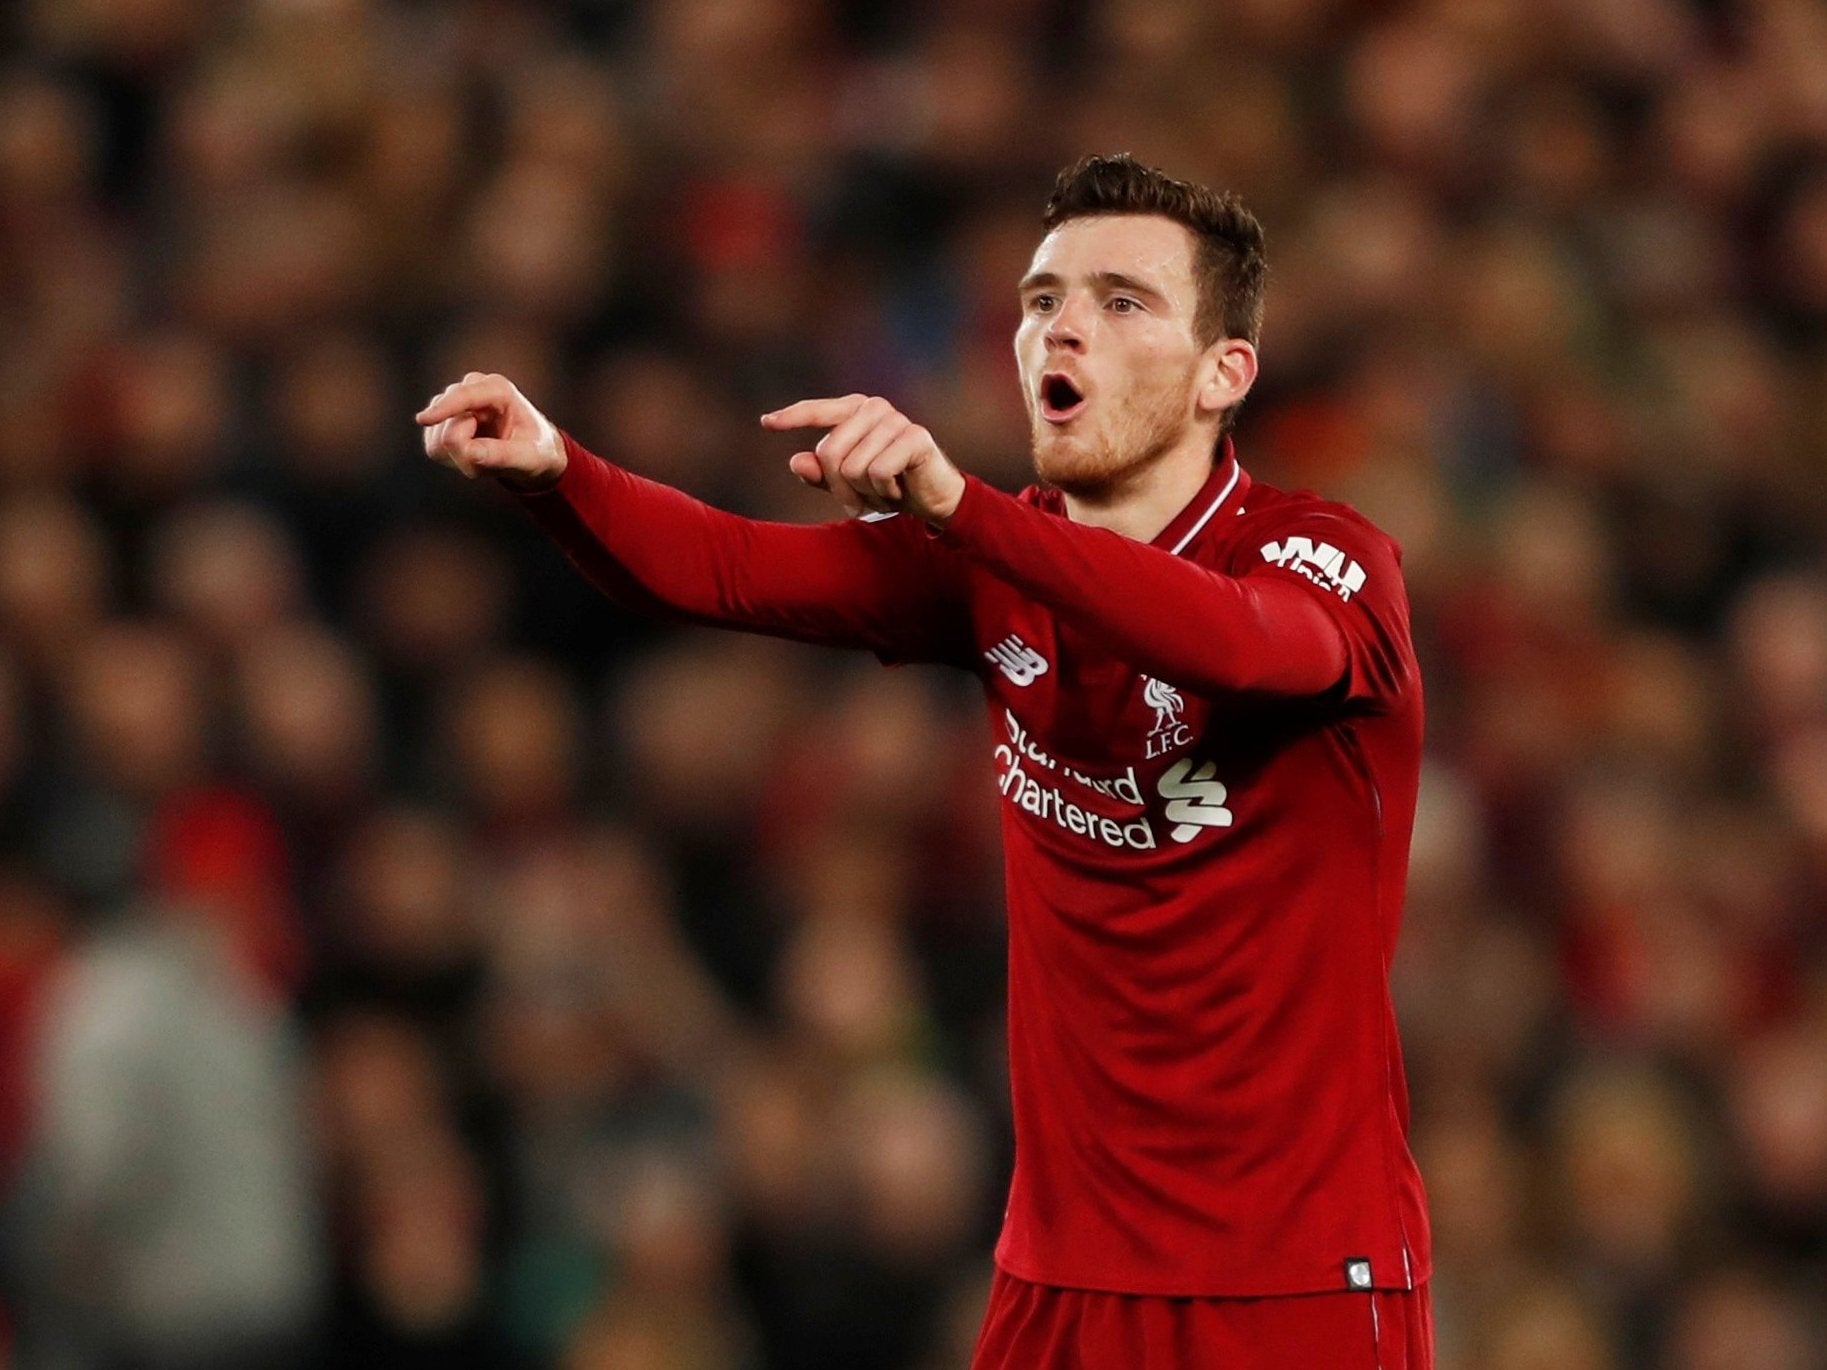 Andrew Robertson has impressed in his short career at Liverpool